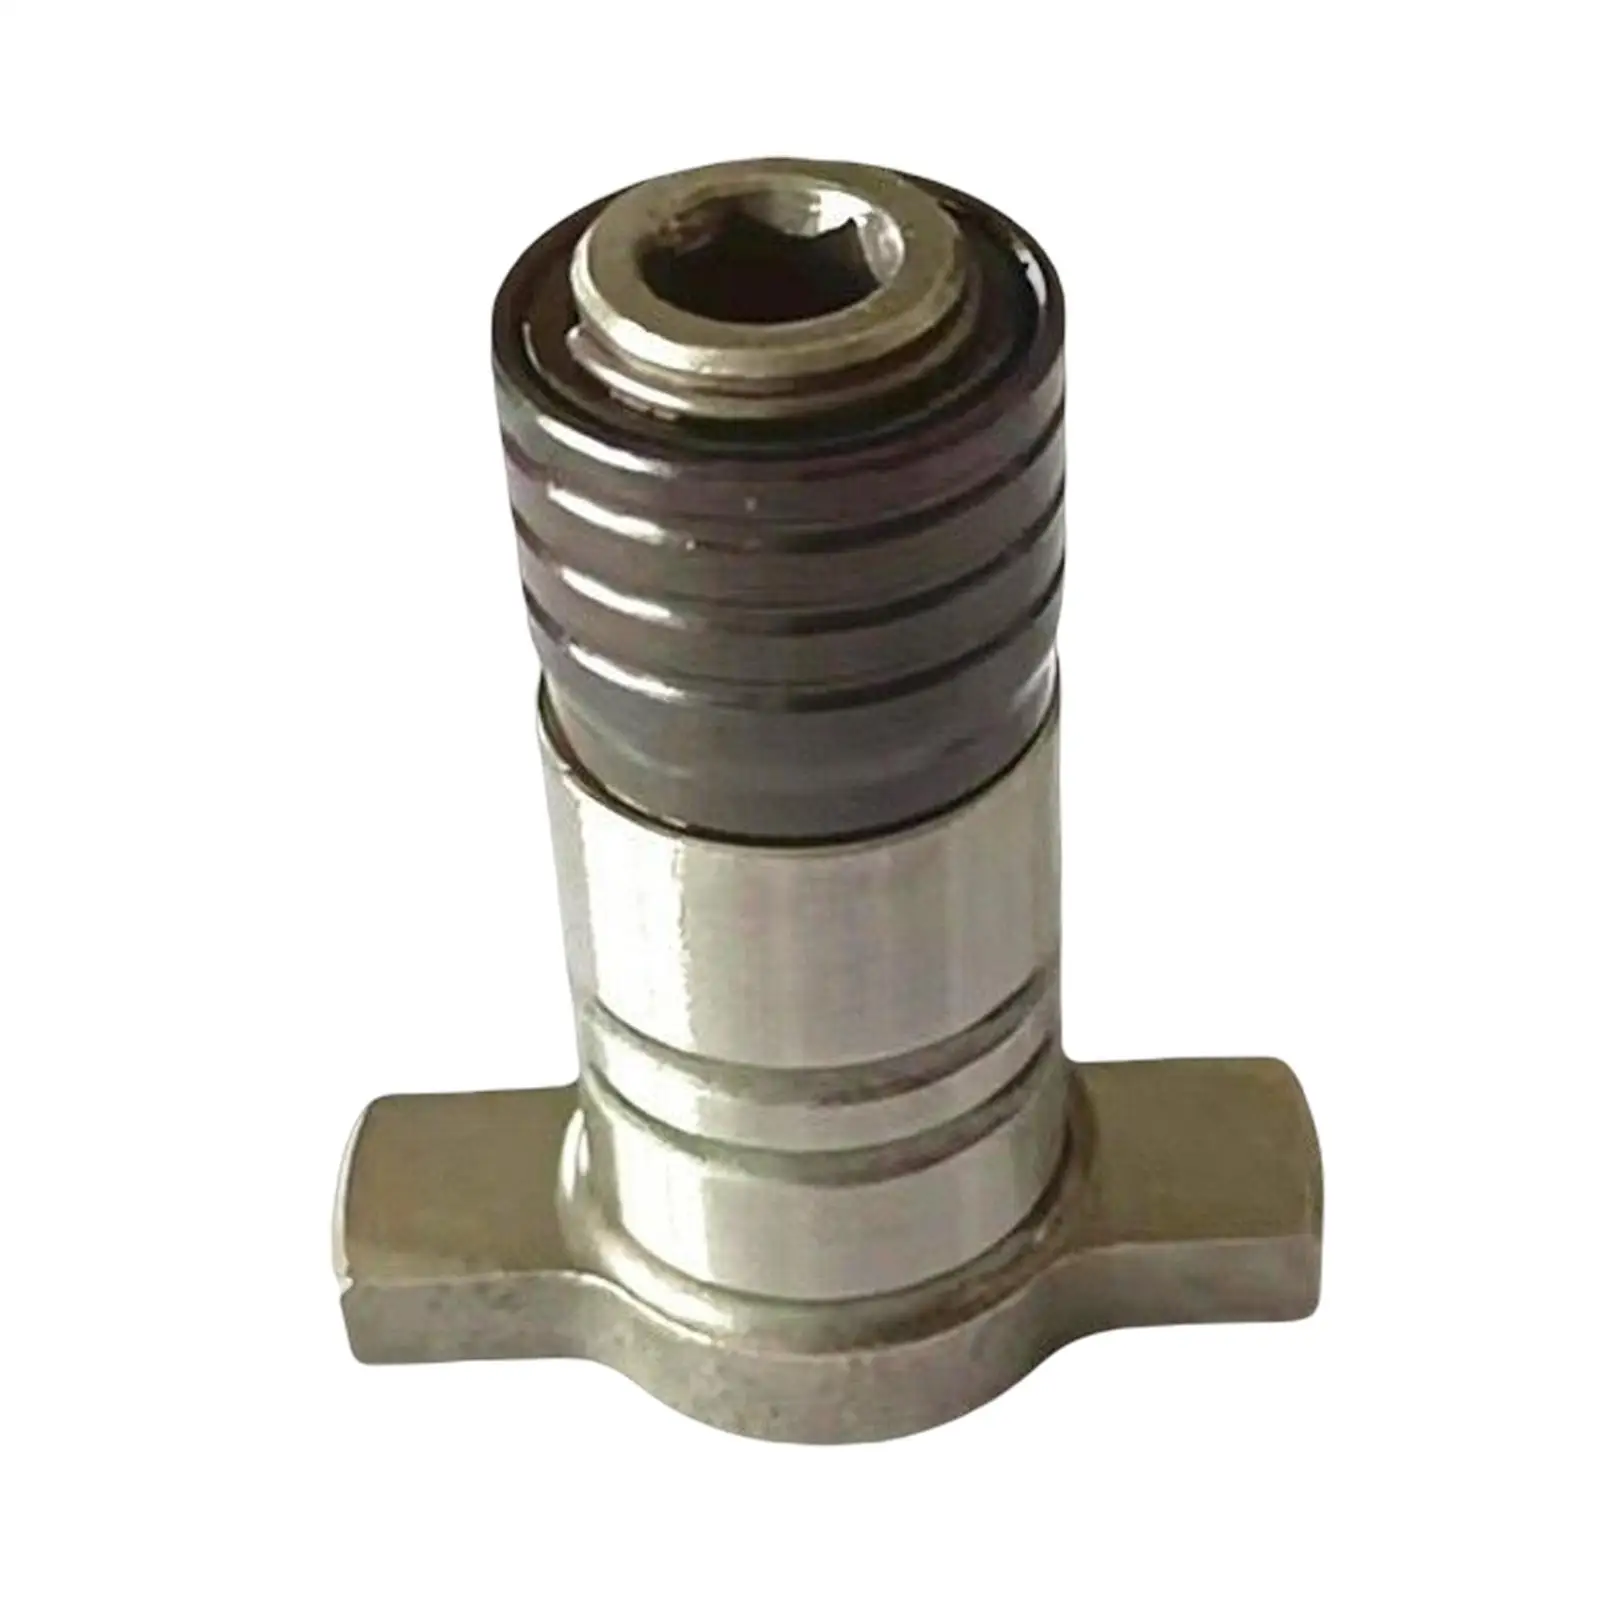 Wrench Shaft Drilling High Performance Dual Use Wrench Part for Hexagonal  Impact Drill Wrenches